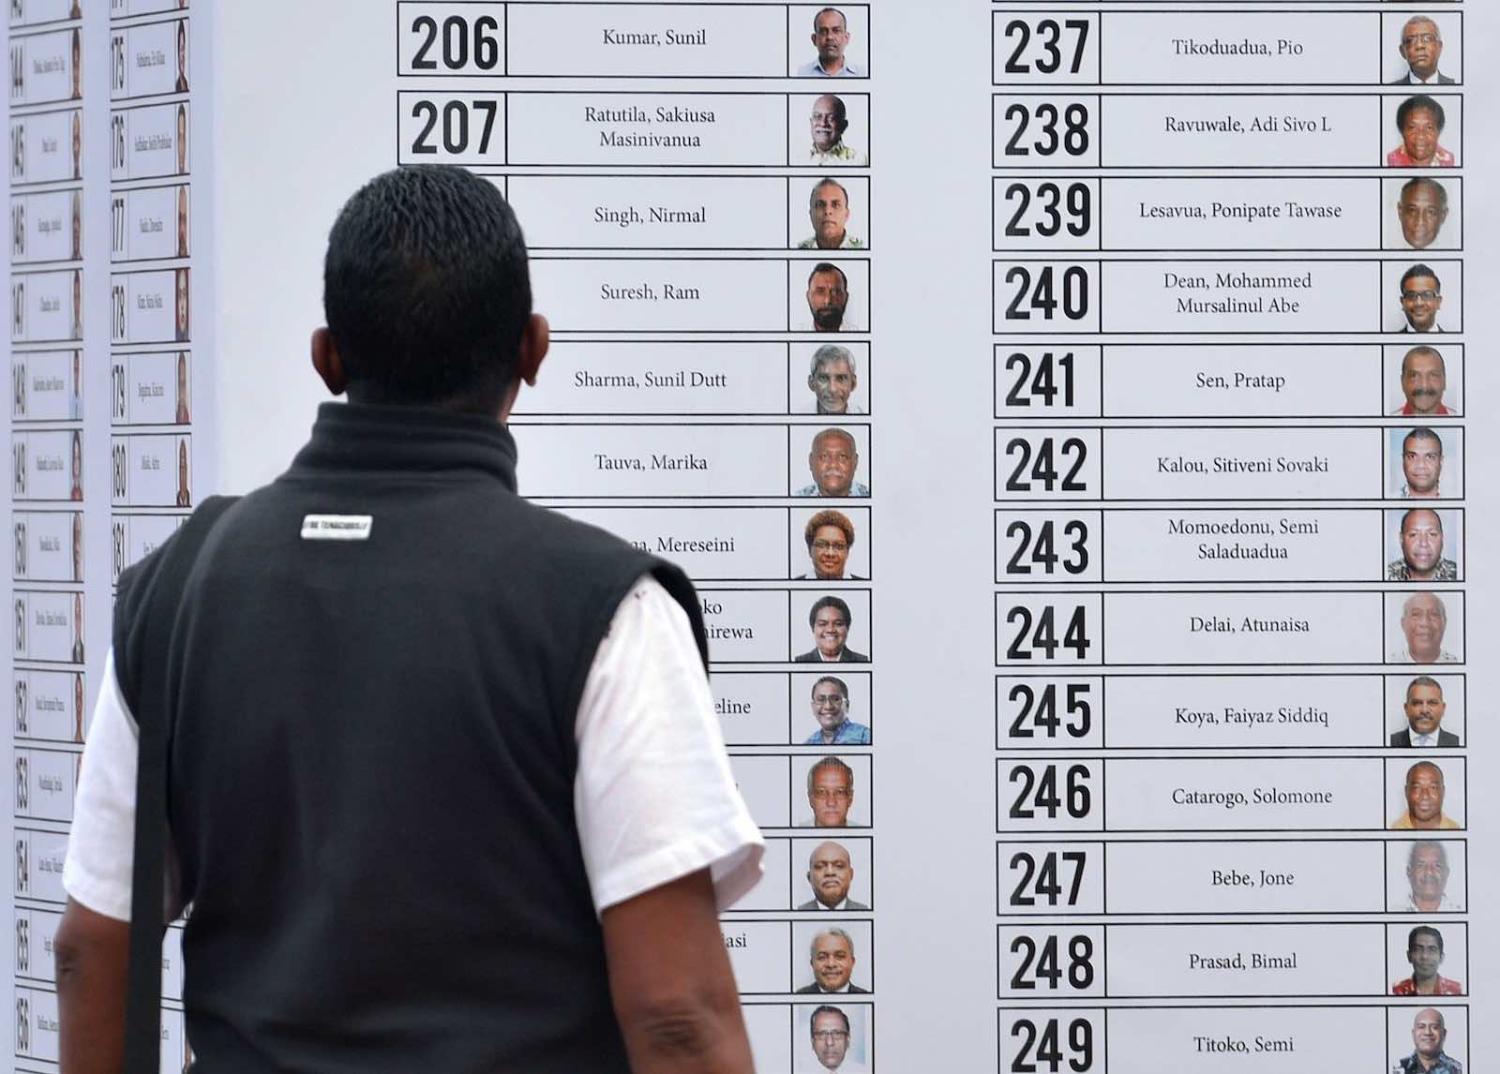 File photo of the candidates list displayed in Suva for the 2014 Fiji elections (Peter Parks/AFP via Getty Images)